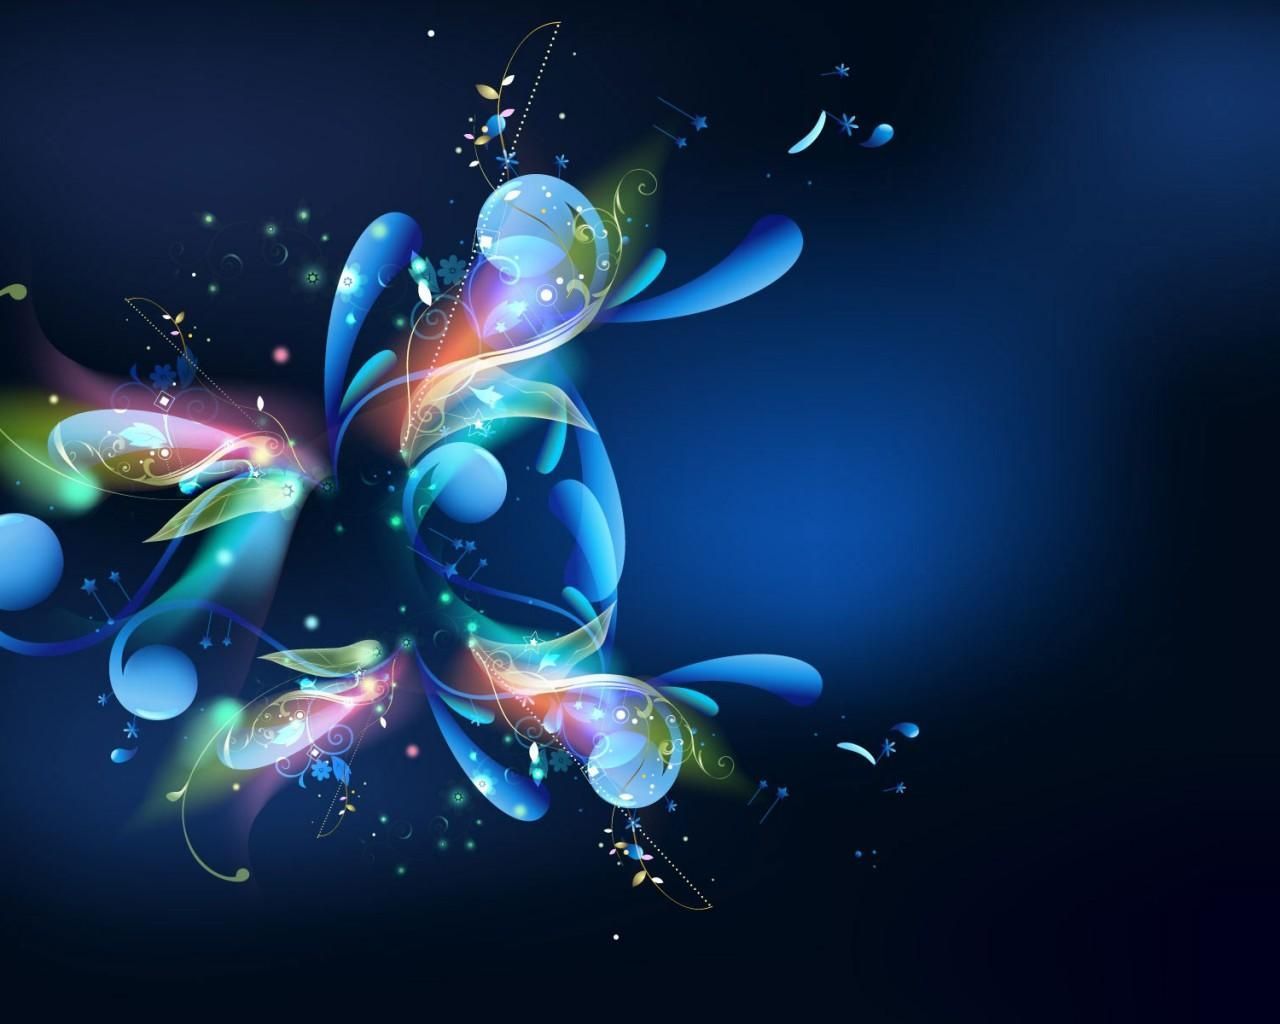 Creative Hd Wallpaper For Pc Full Screen Free Download 1920x1080px ...